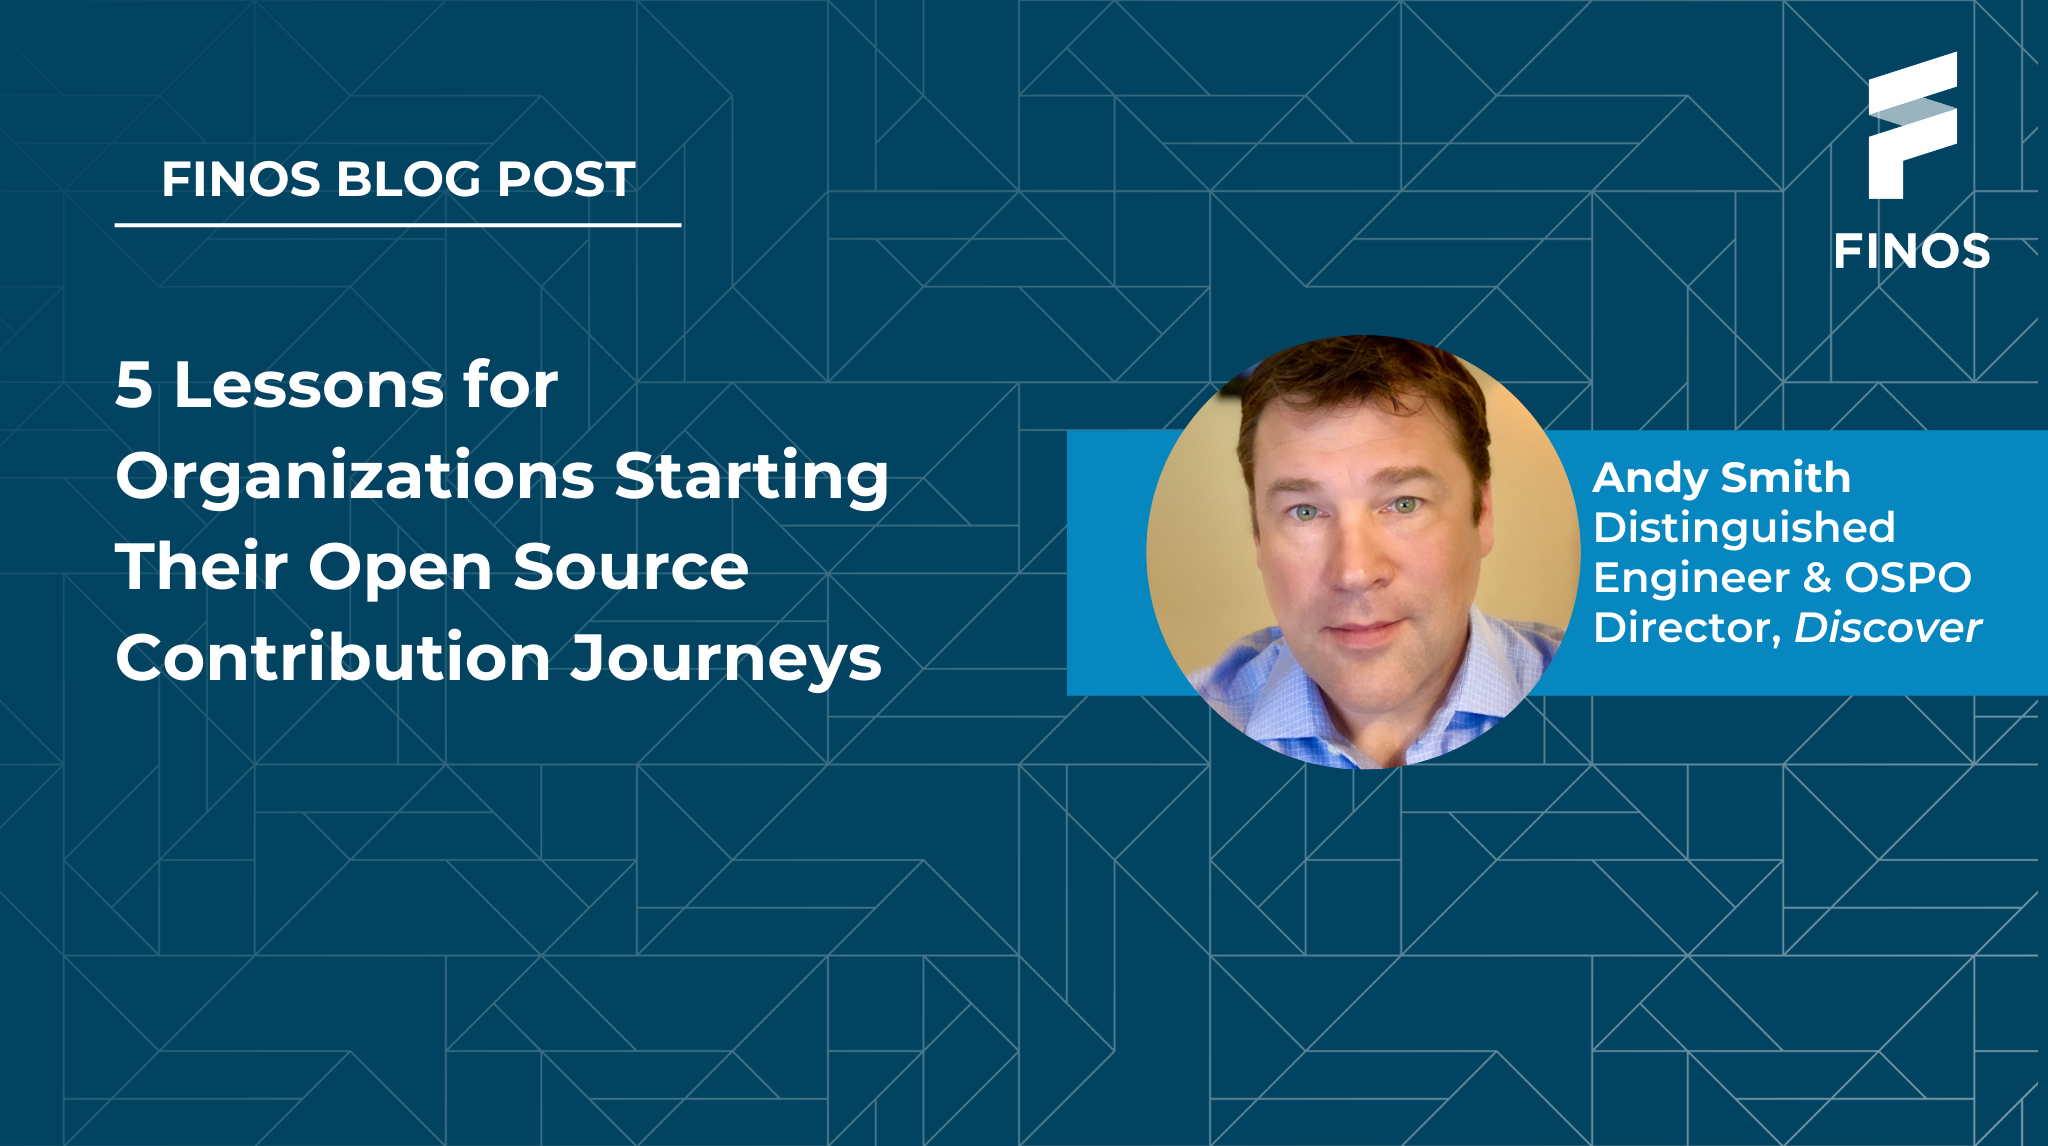 5 Lessons for Organizations Starting Their Open Source Contribution Journeys - Andy Smith, Discover